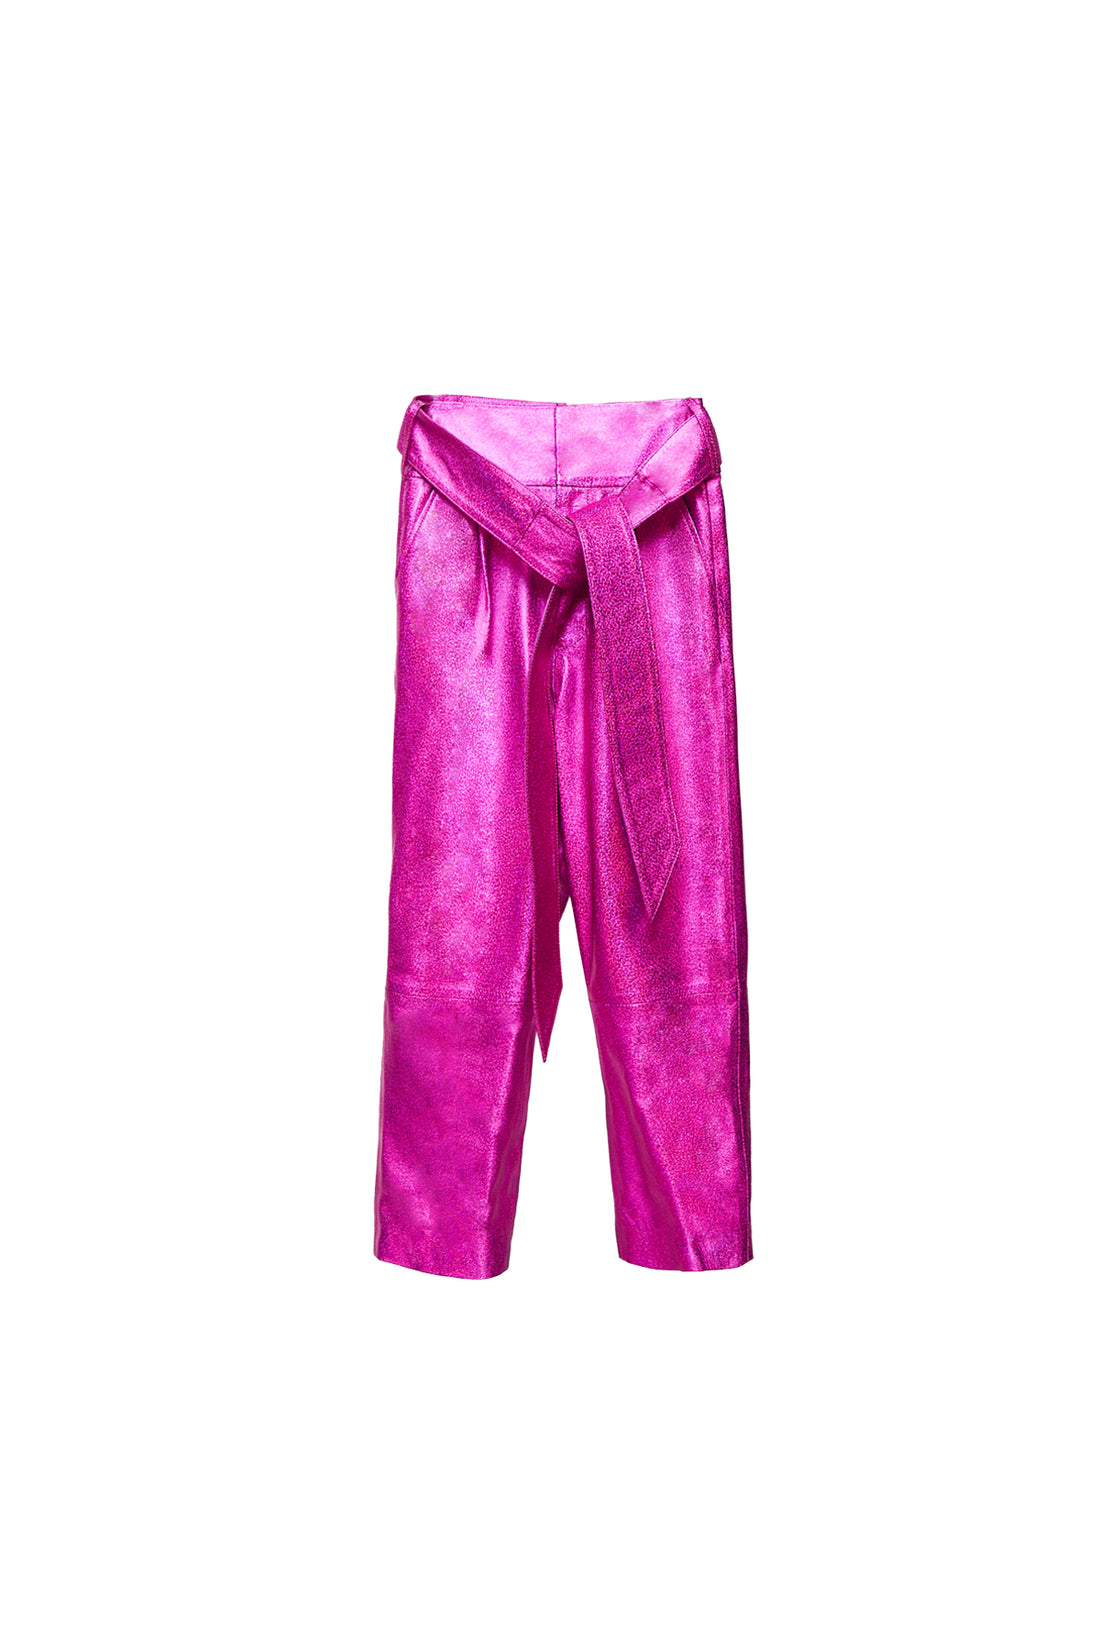 Lotería Trouser Pink